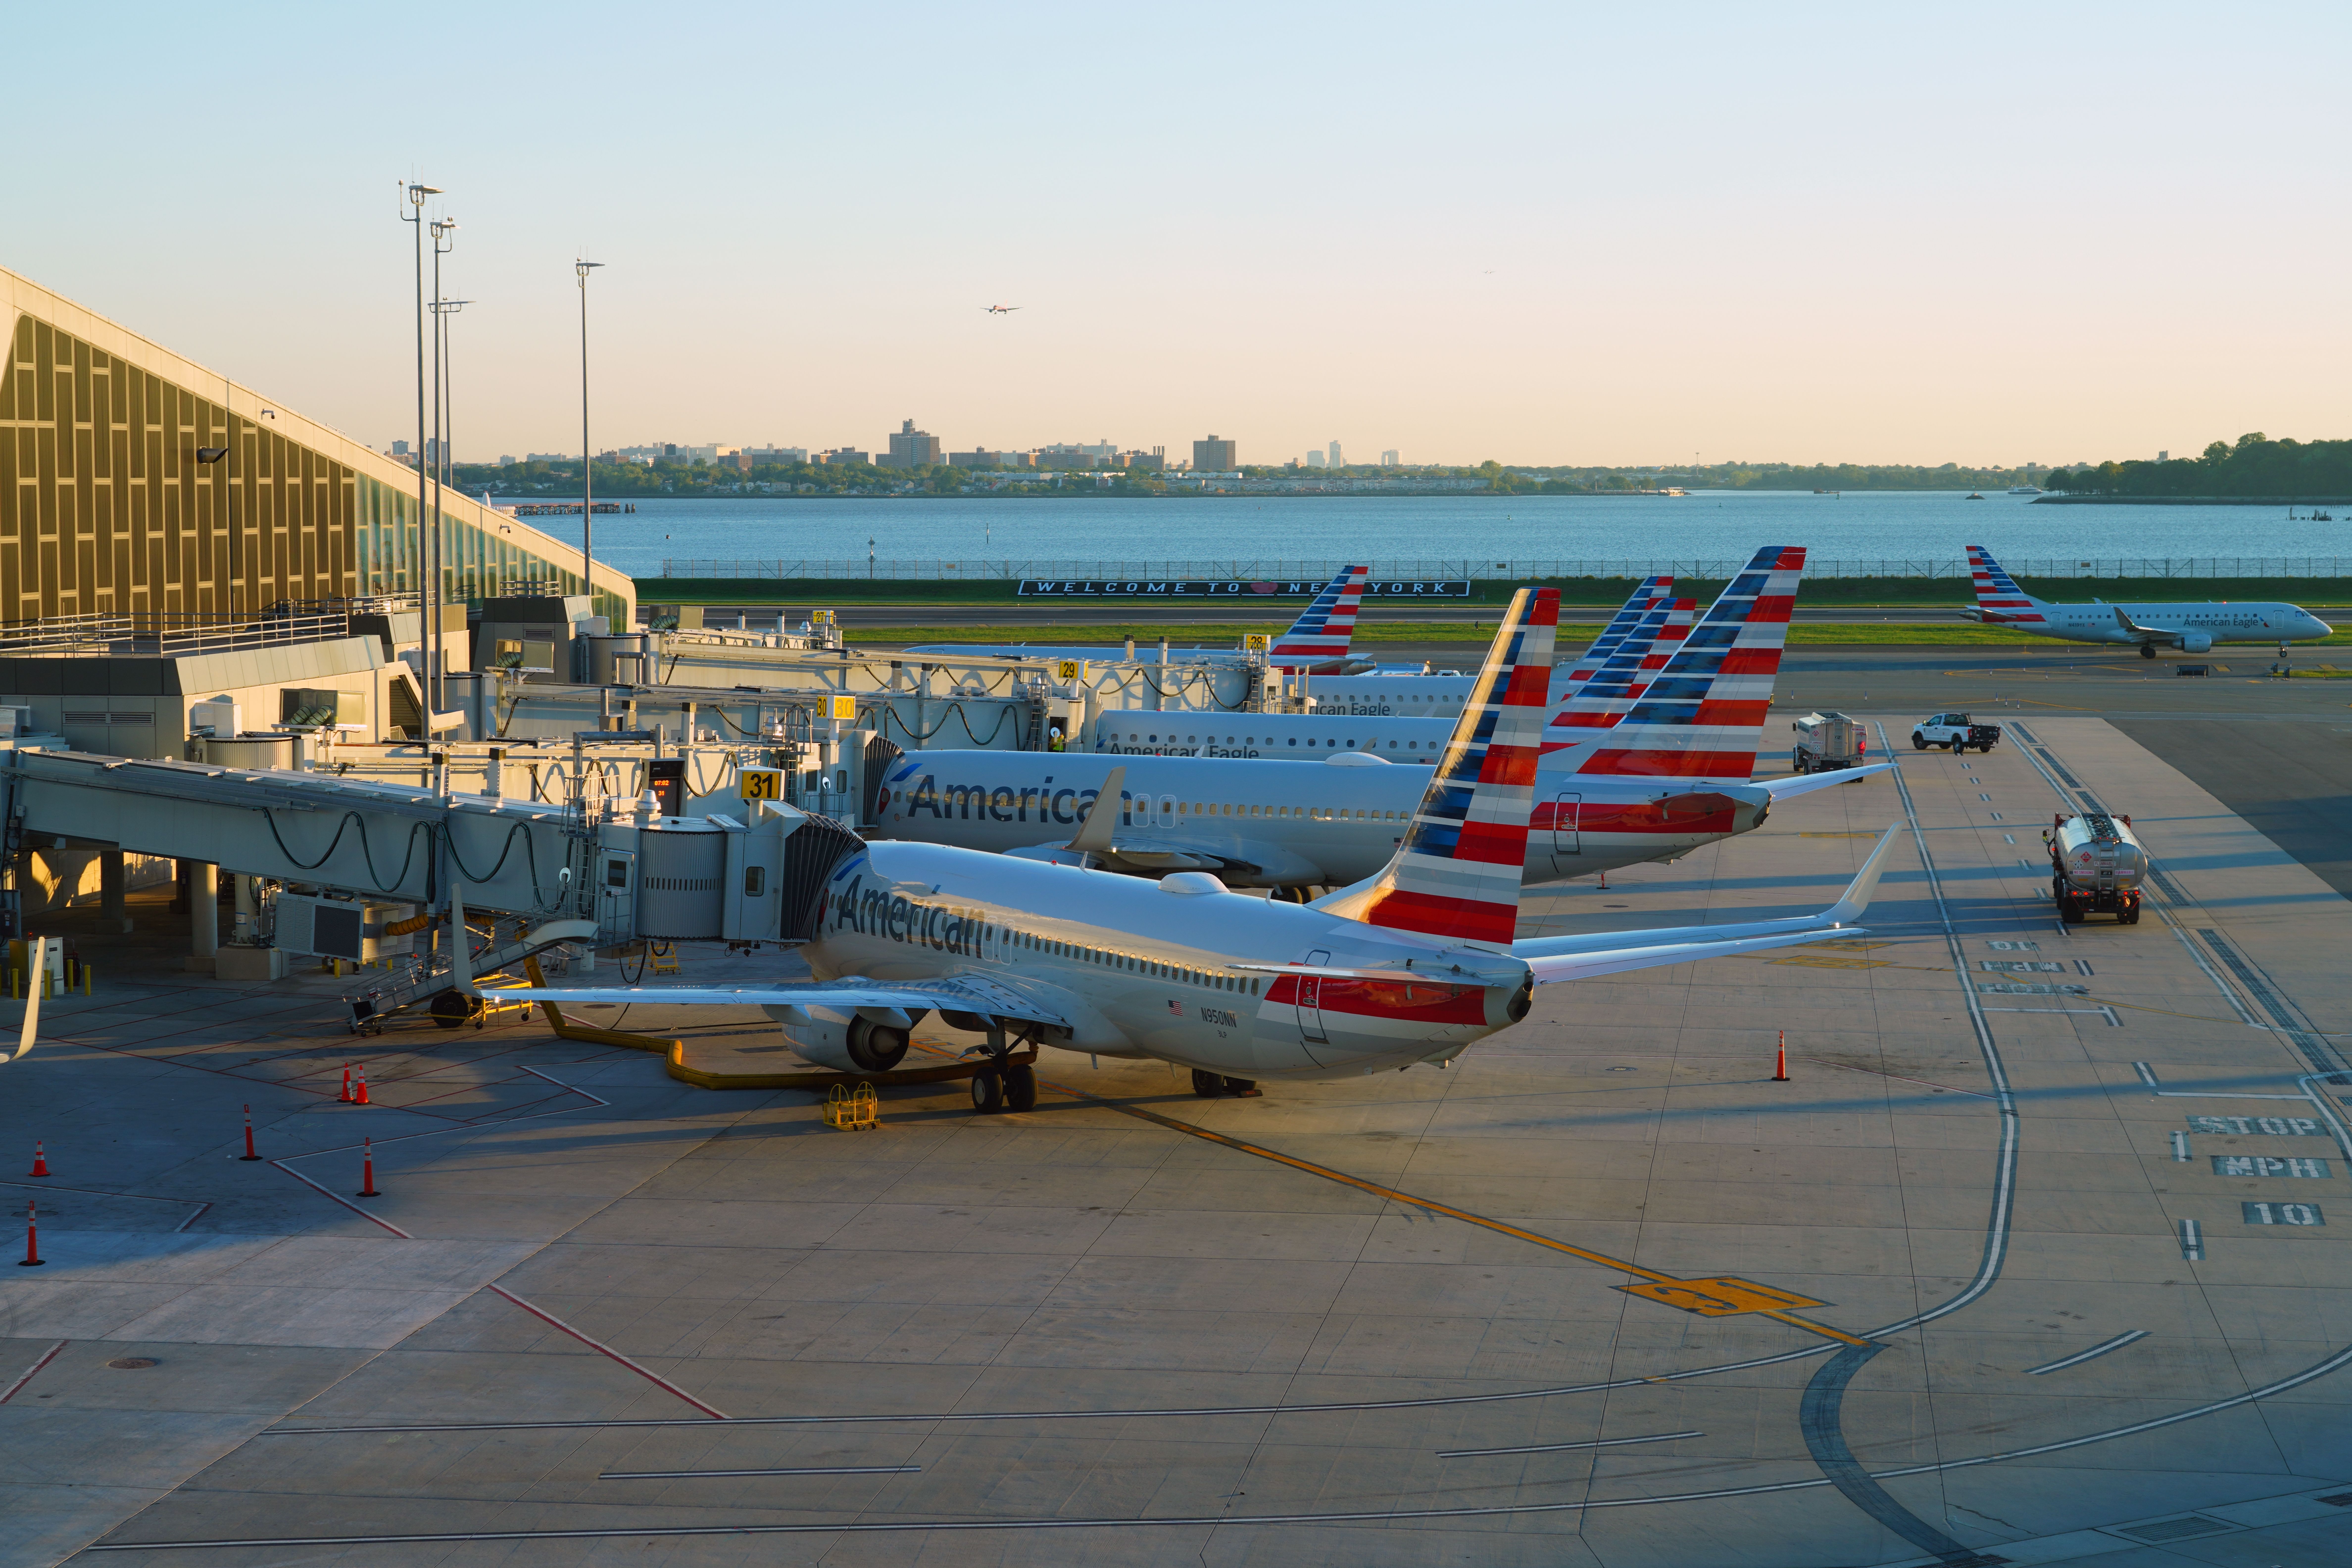 Multiple American Airlines aircraft parked at LaGuardia Airport.